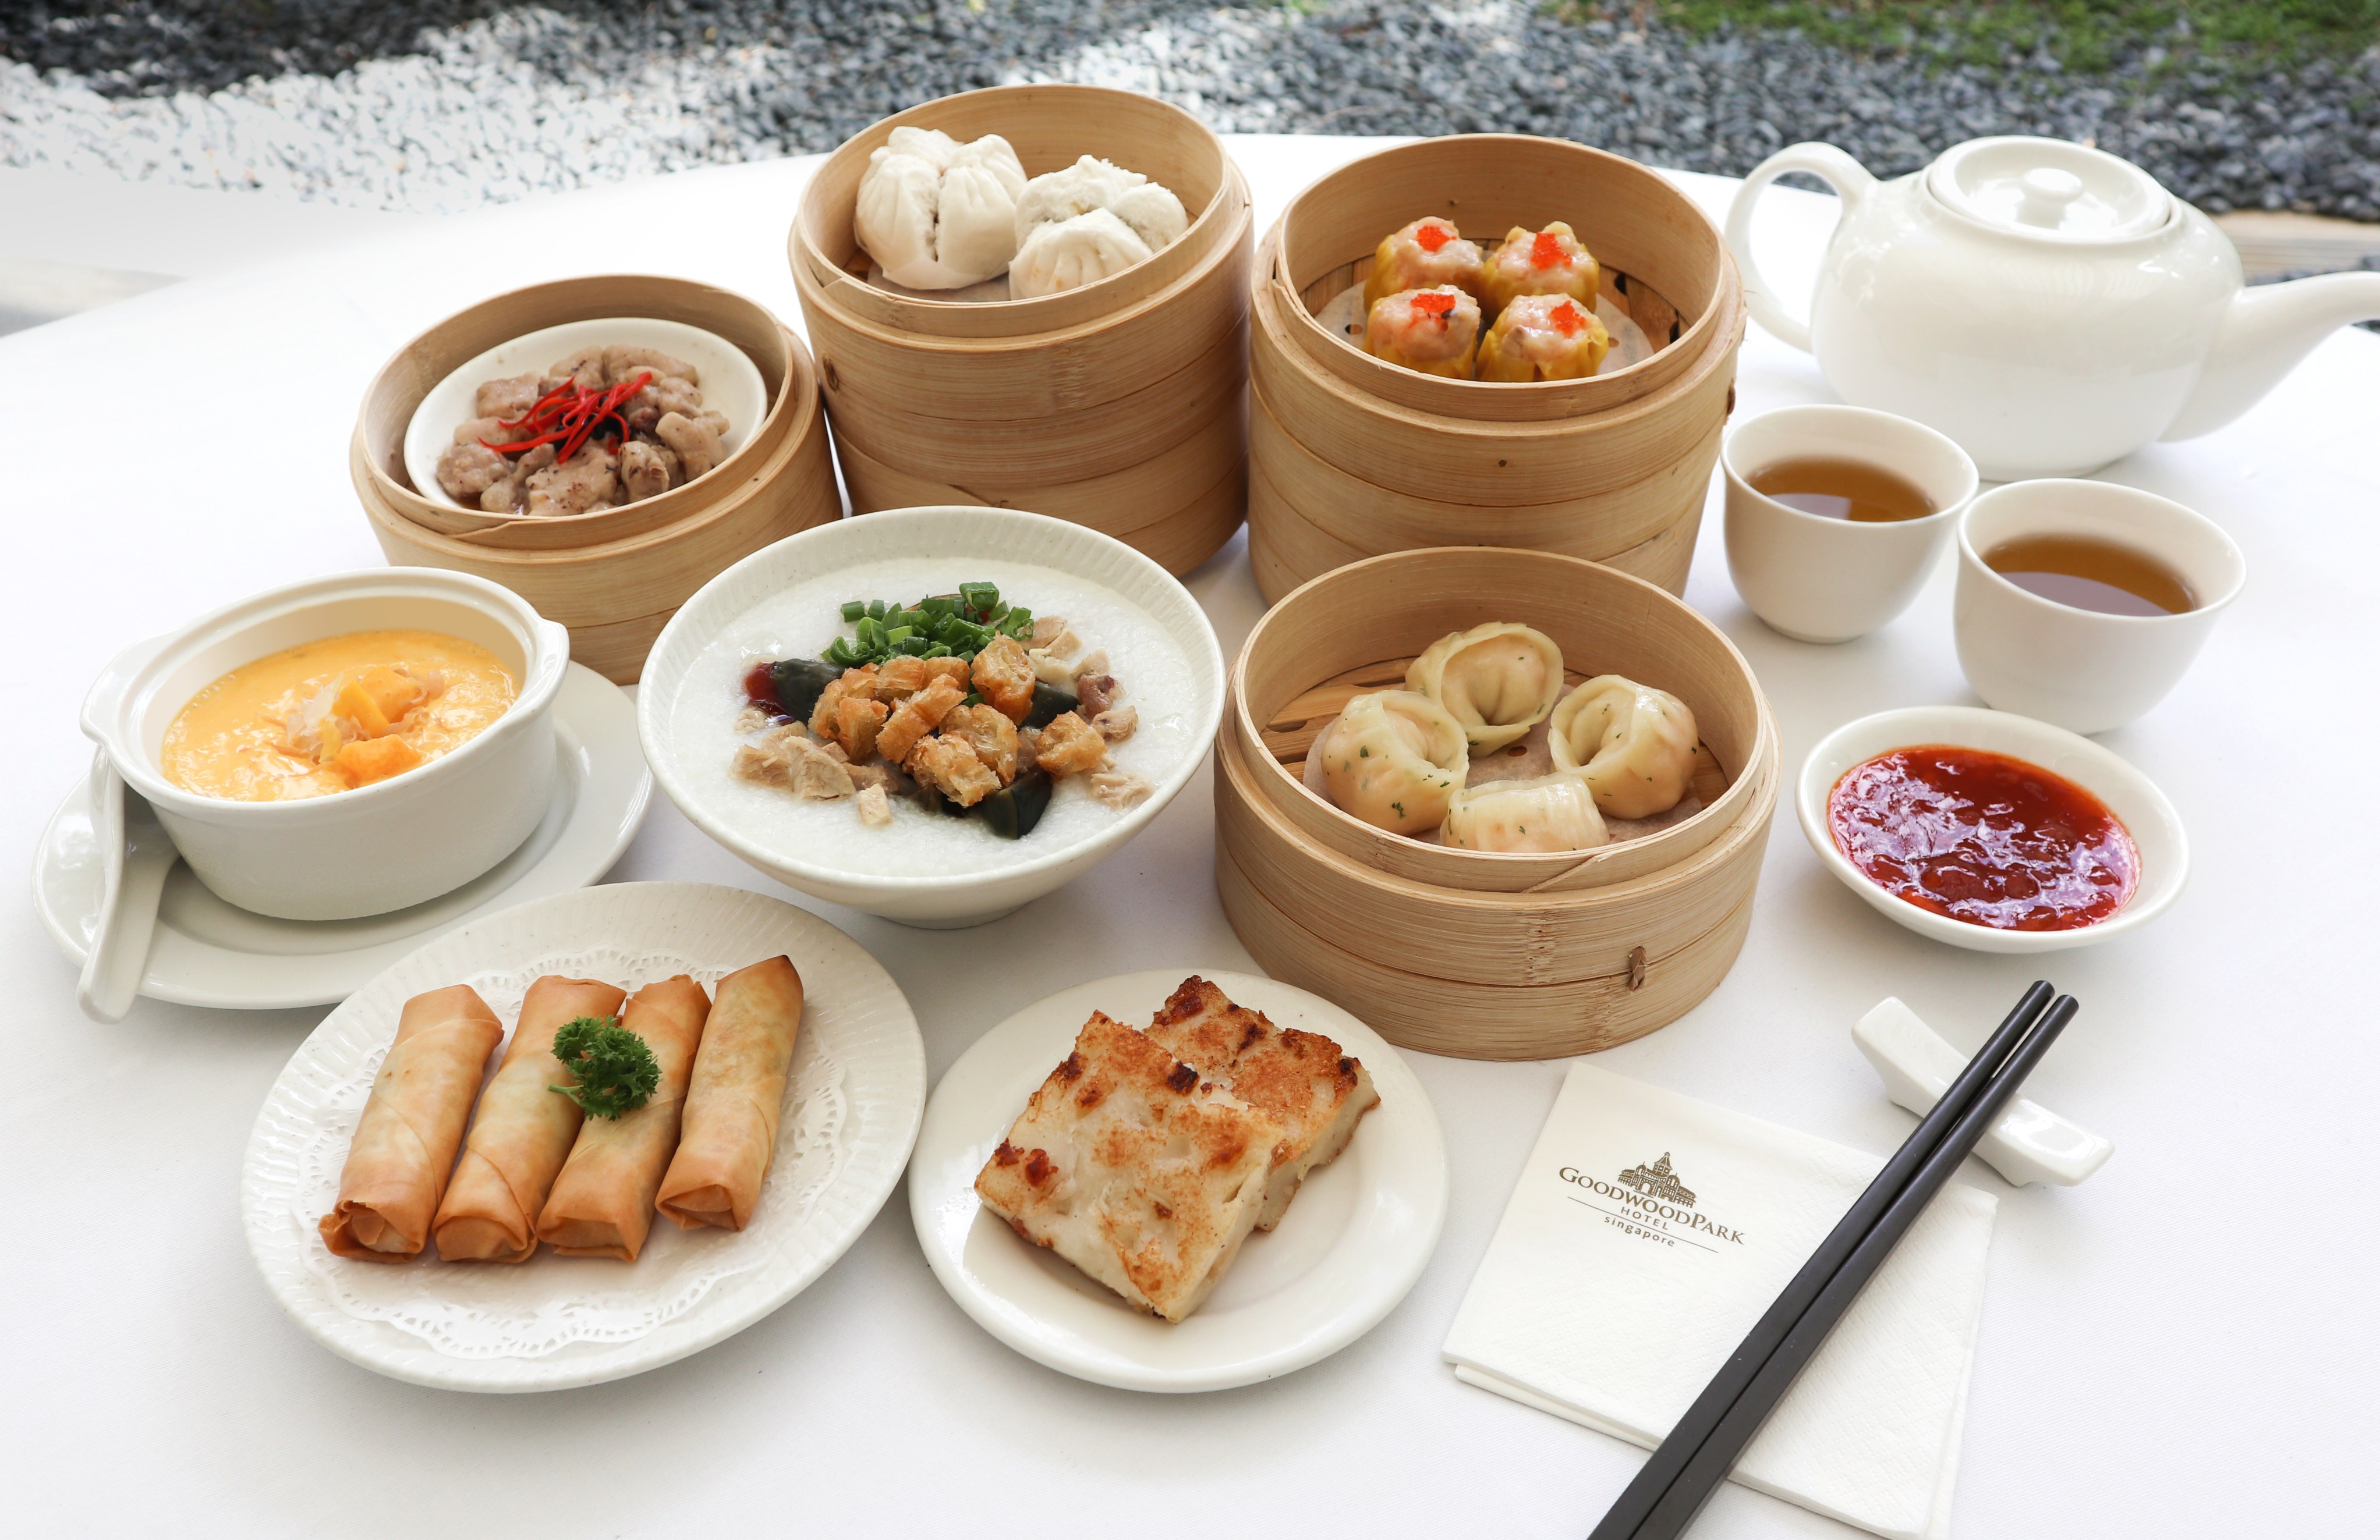 , Dim Sum Lunch for 2 at Min Jiang for $36